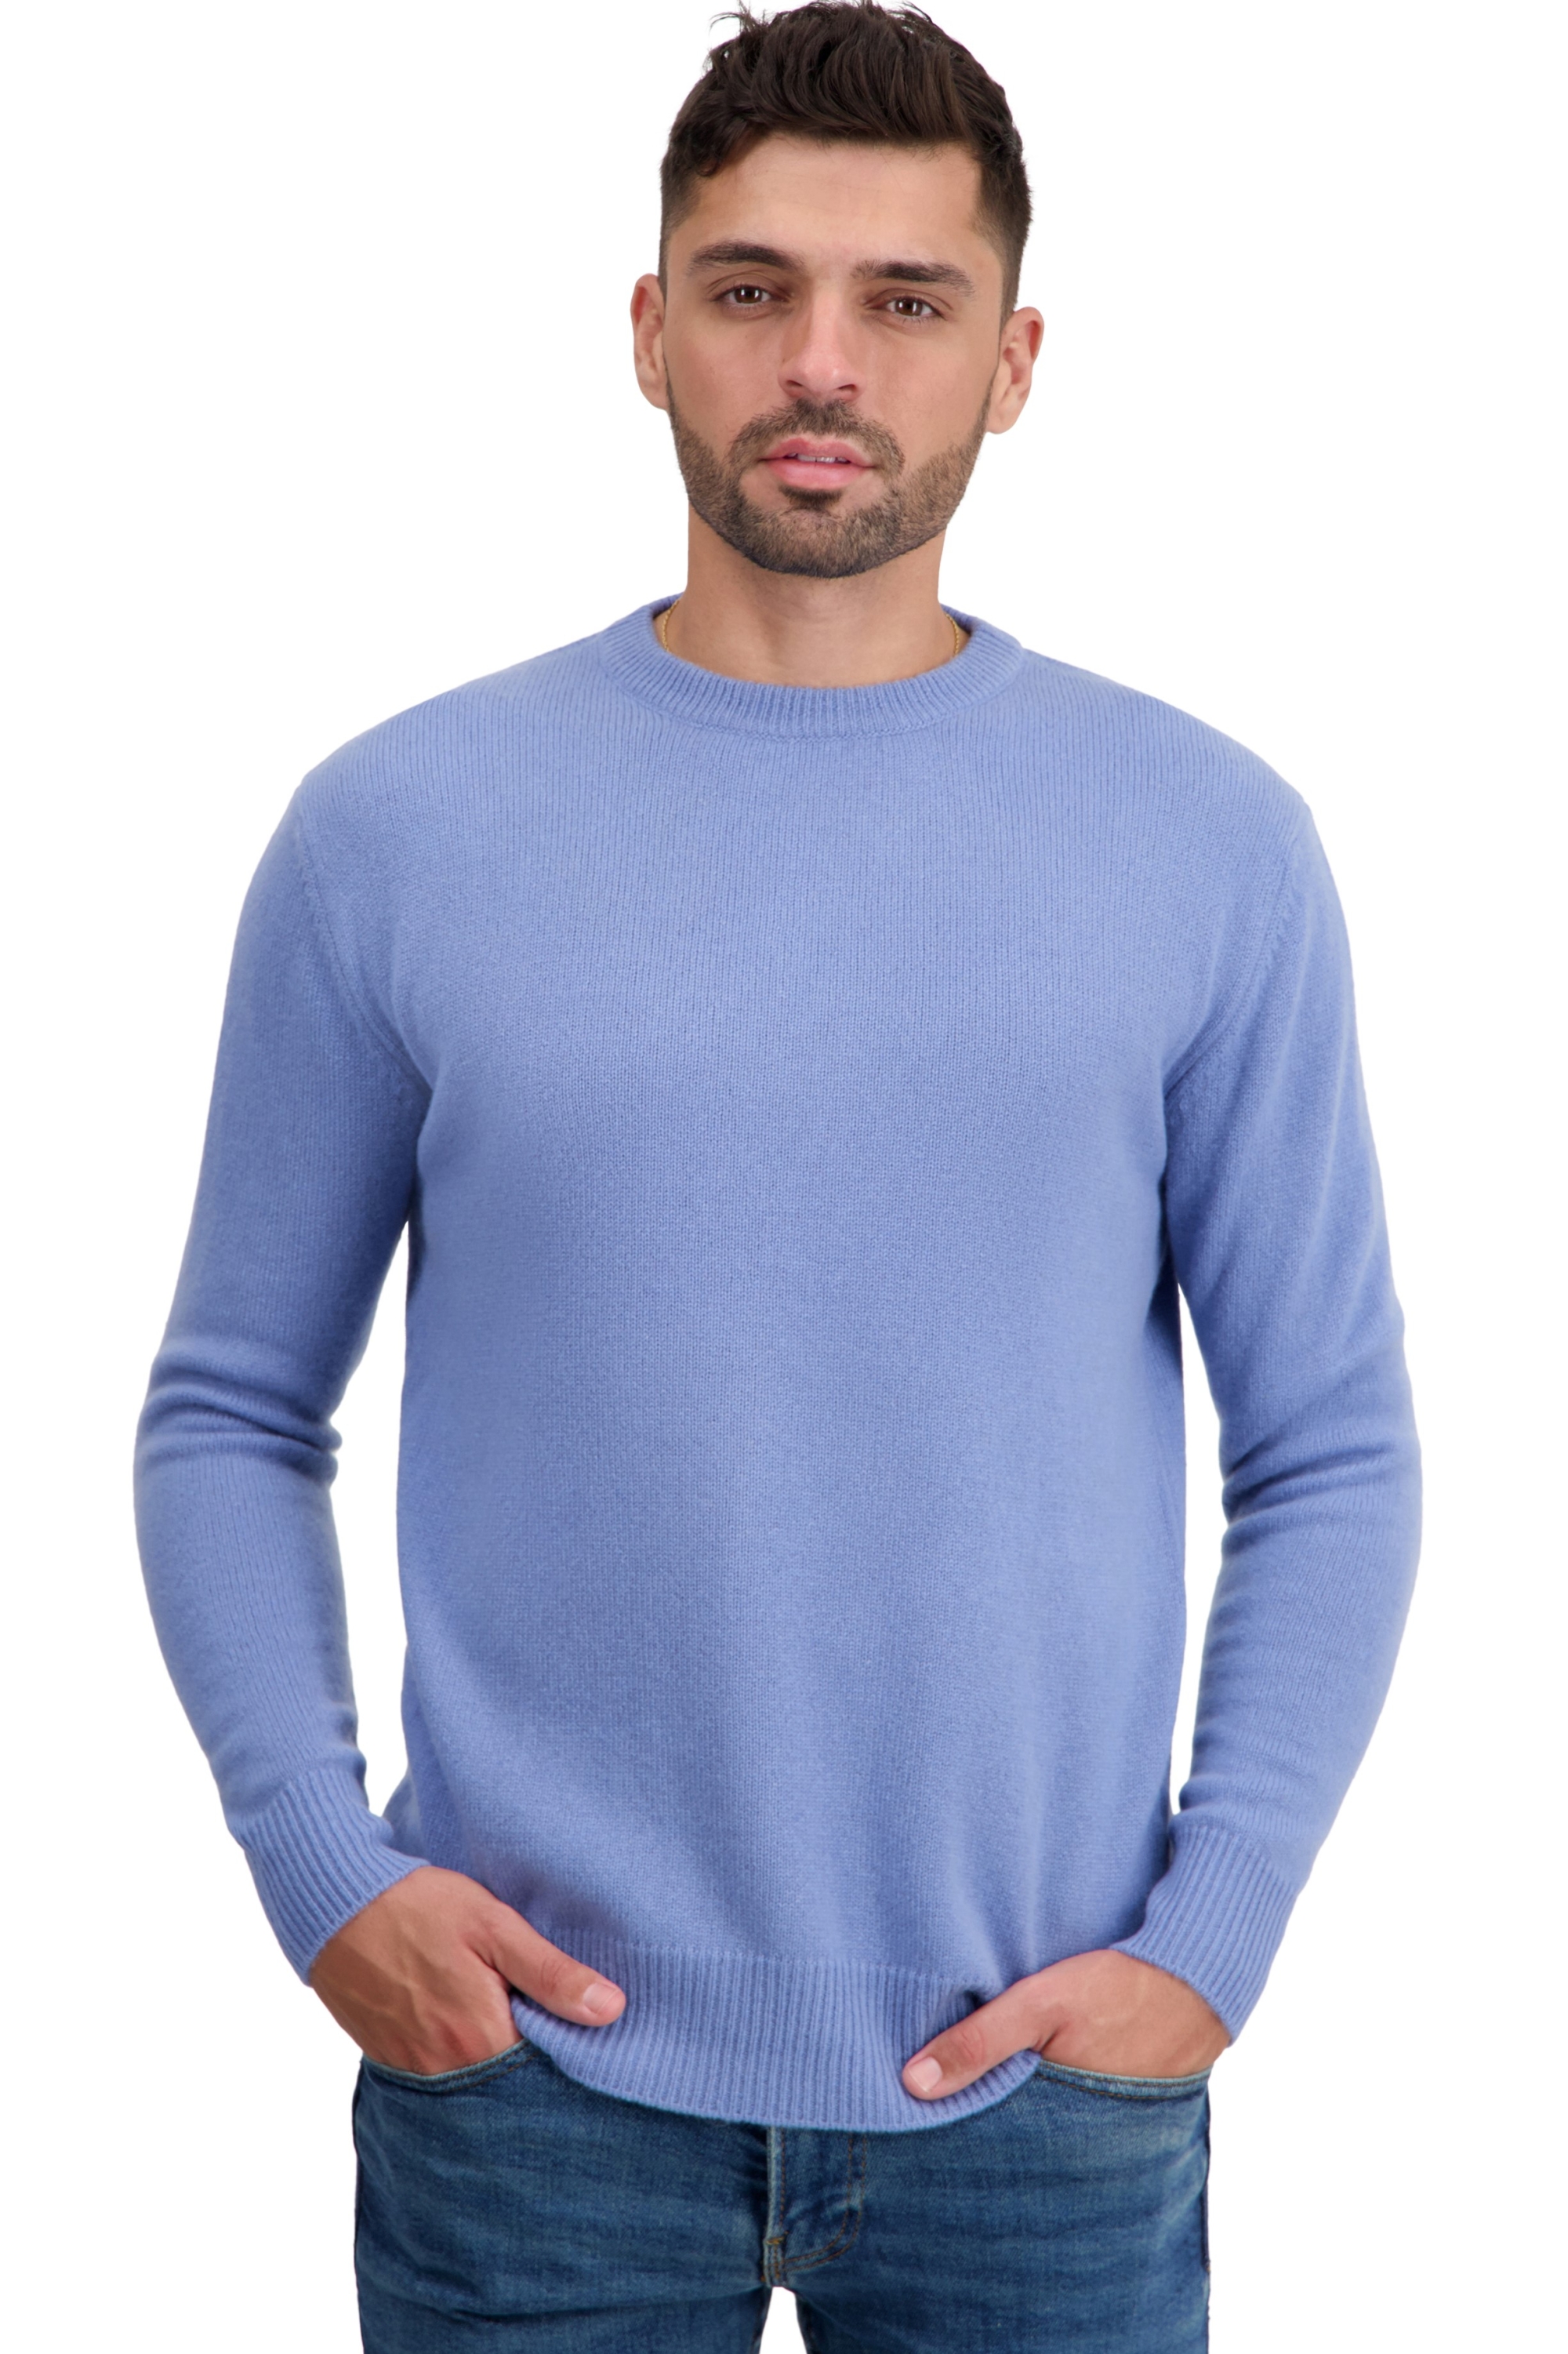 Cashmere men basic sweaters at low prices touraine first light blue xl